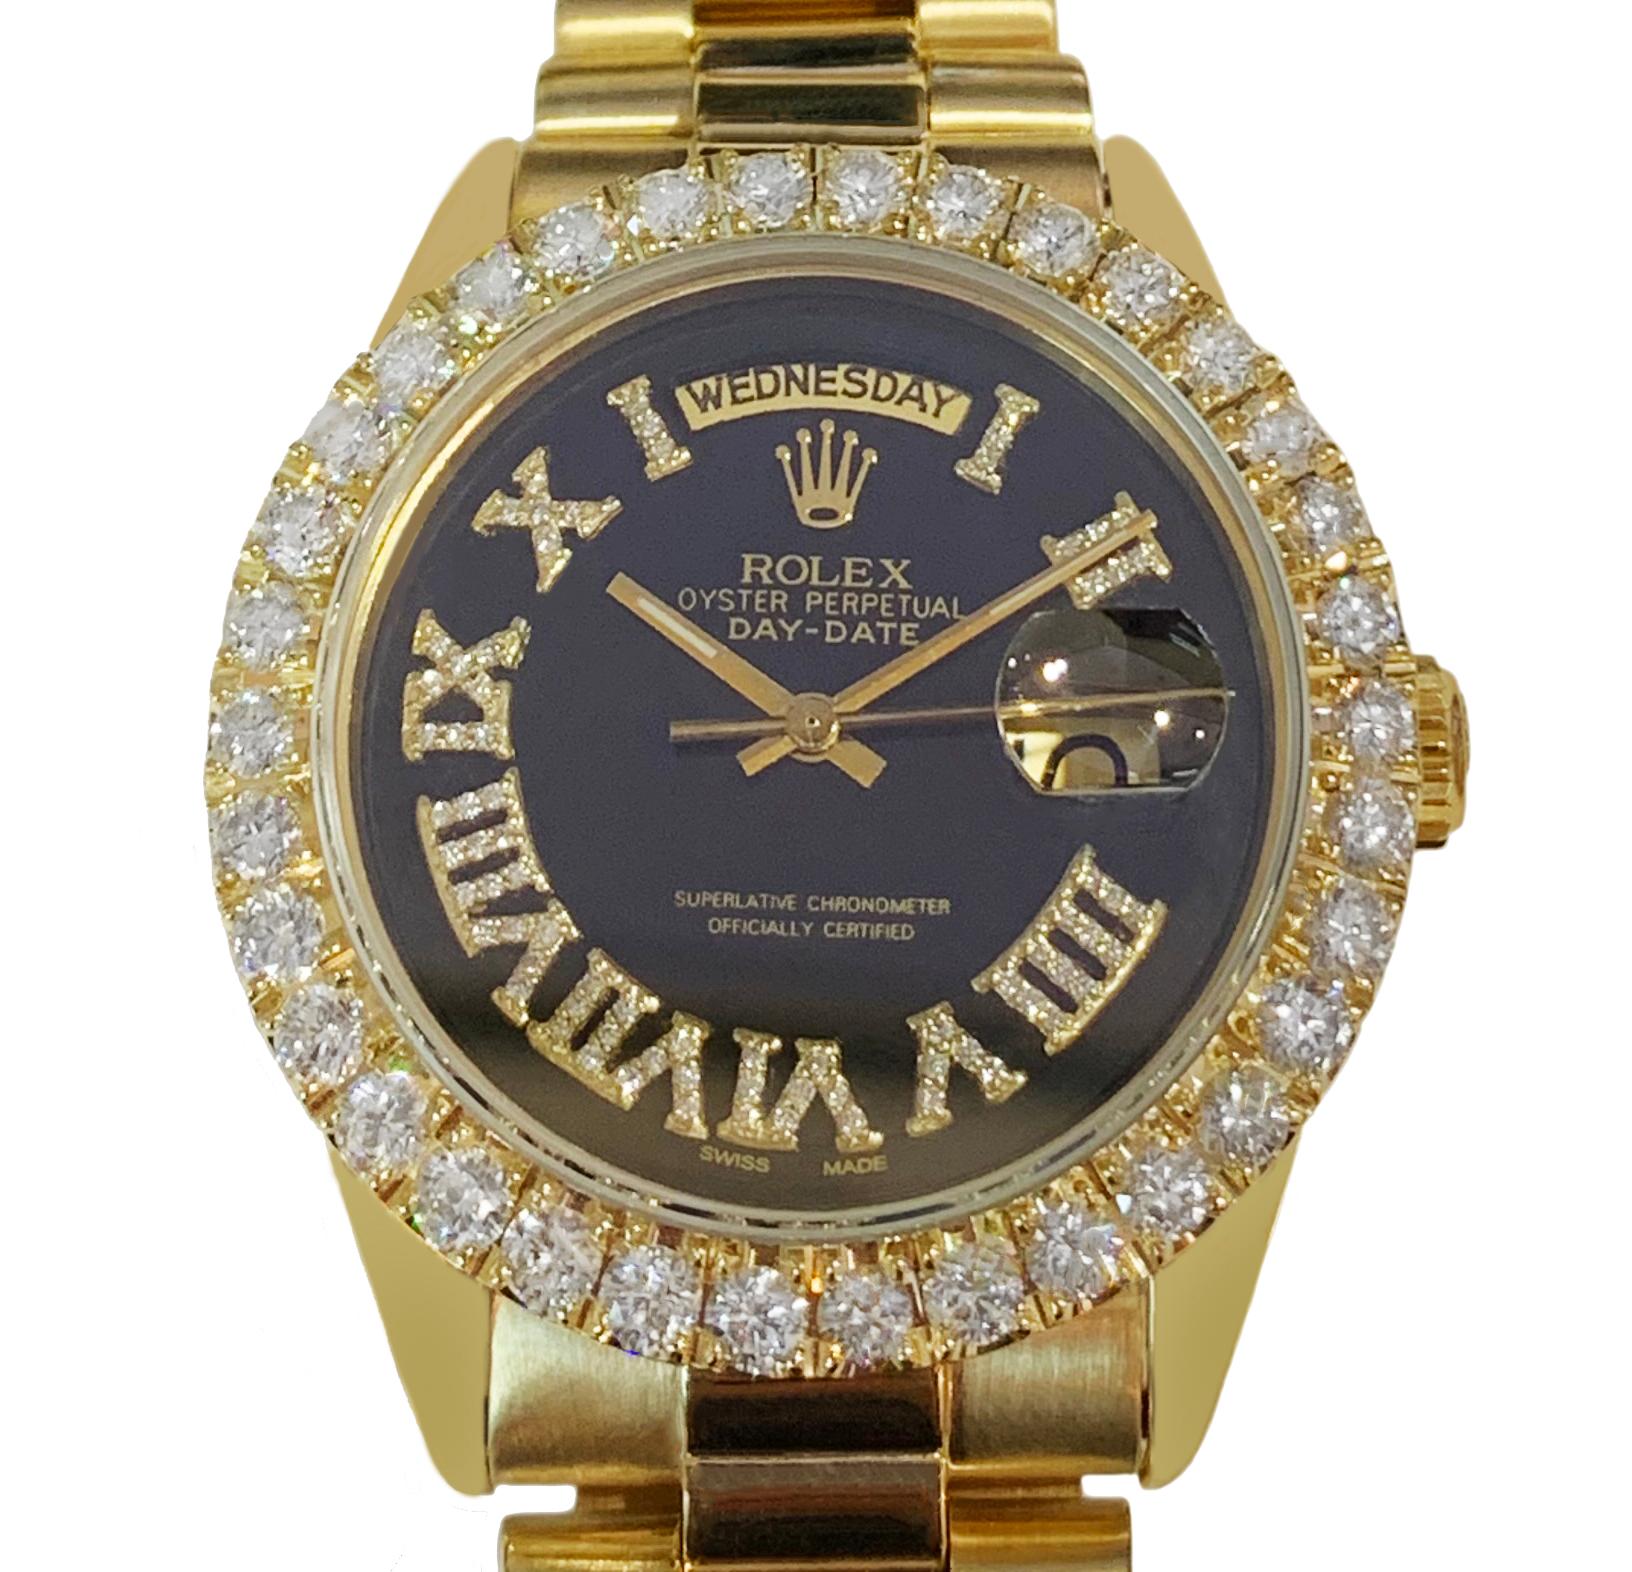 -Mint condition
-Single quick
-18k Yellow Gold
-Case size: 36mm
-Diamond Hour Markers
-Aftermarket Dial: Black
-Aftermarket Diamond Bezel
-Diamond: 3.25ct, VS clarity, G color
-Comes with box, no papers